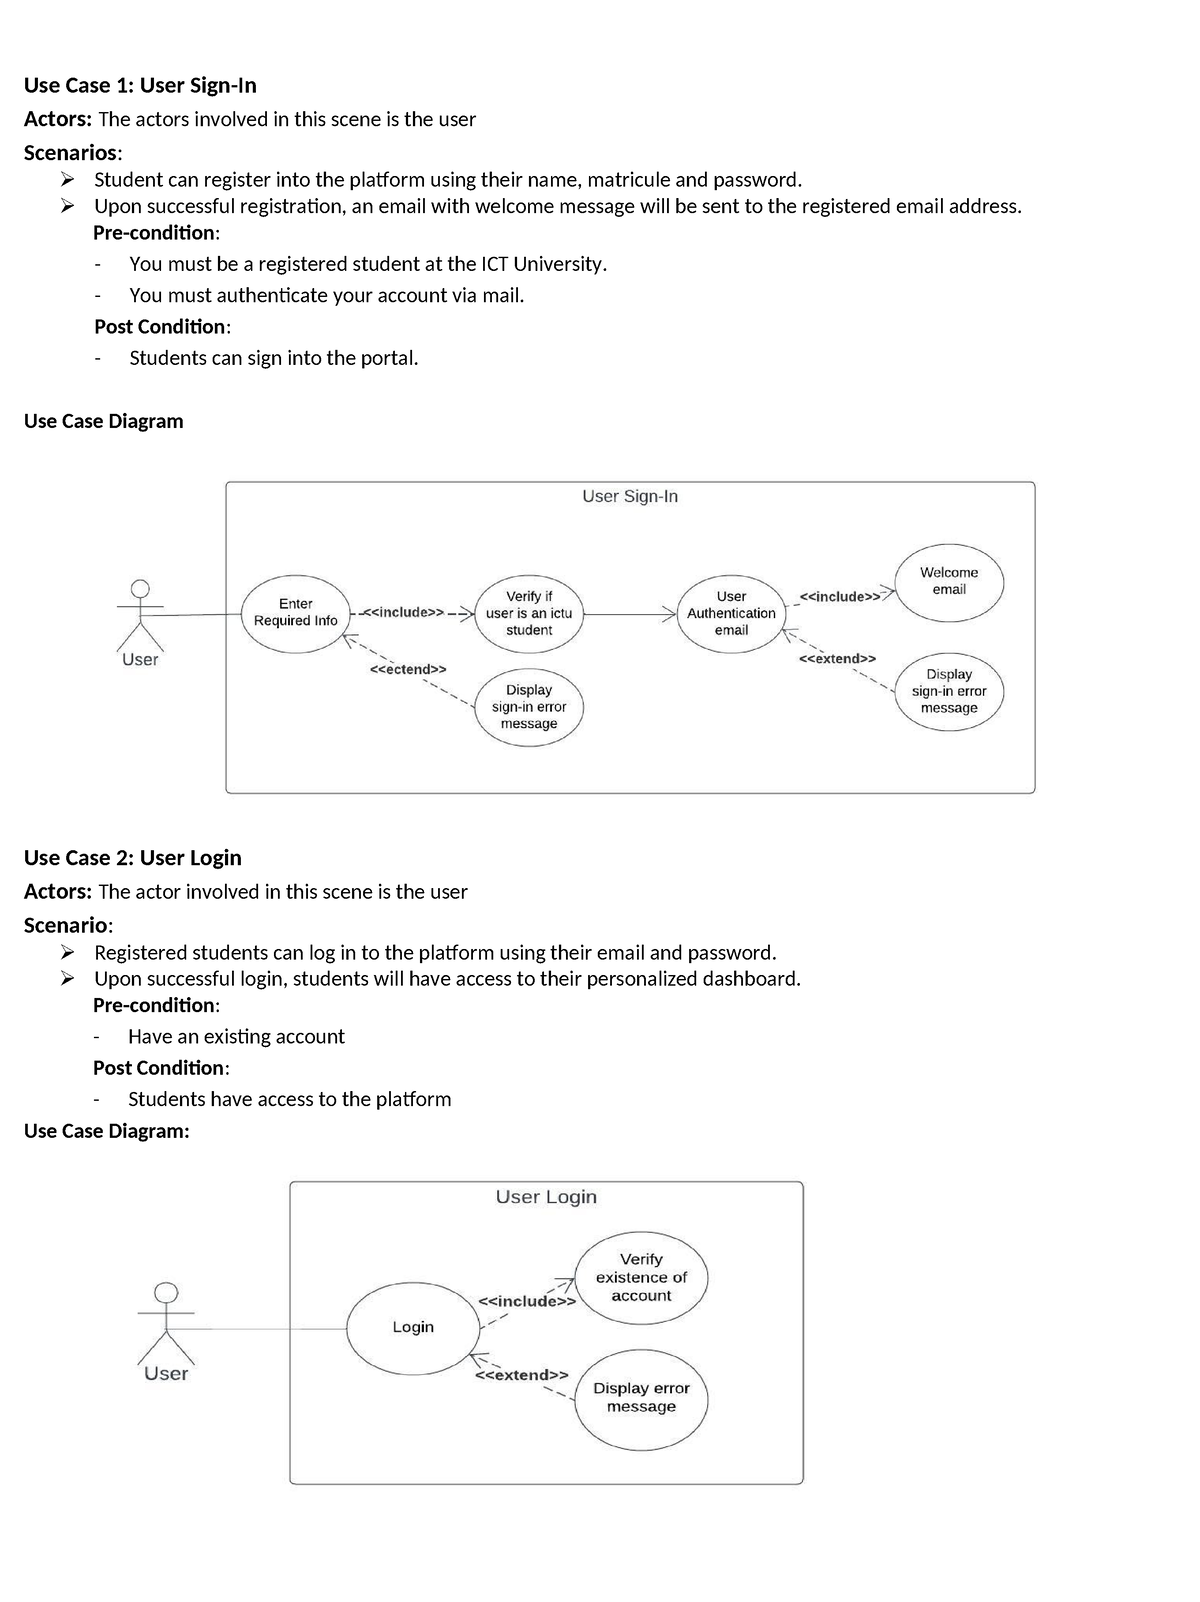 Use Cases For Lse Uml Use Case Diagrams Use Case 1 User Sign In Actors The Actors Involved 8526